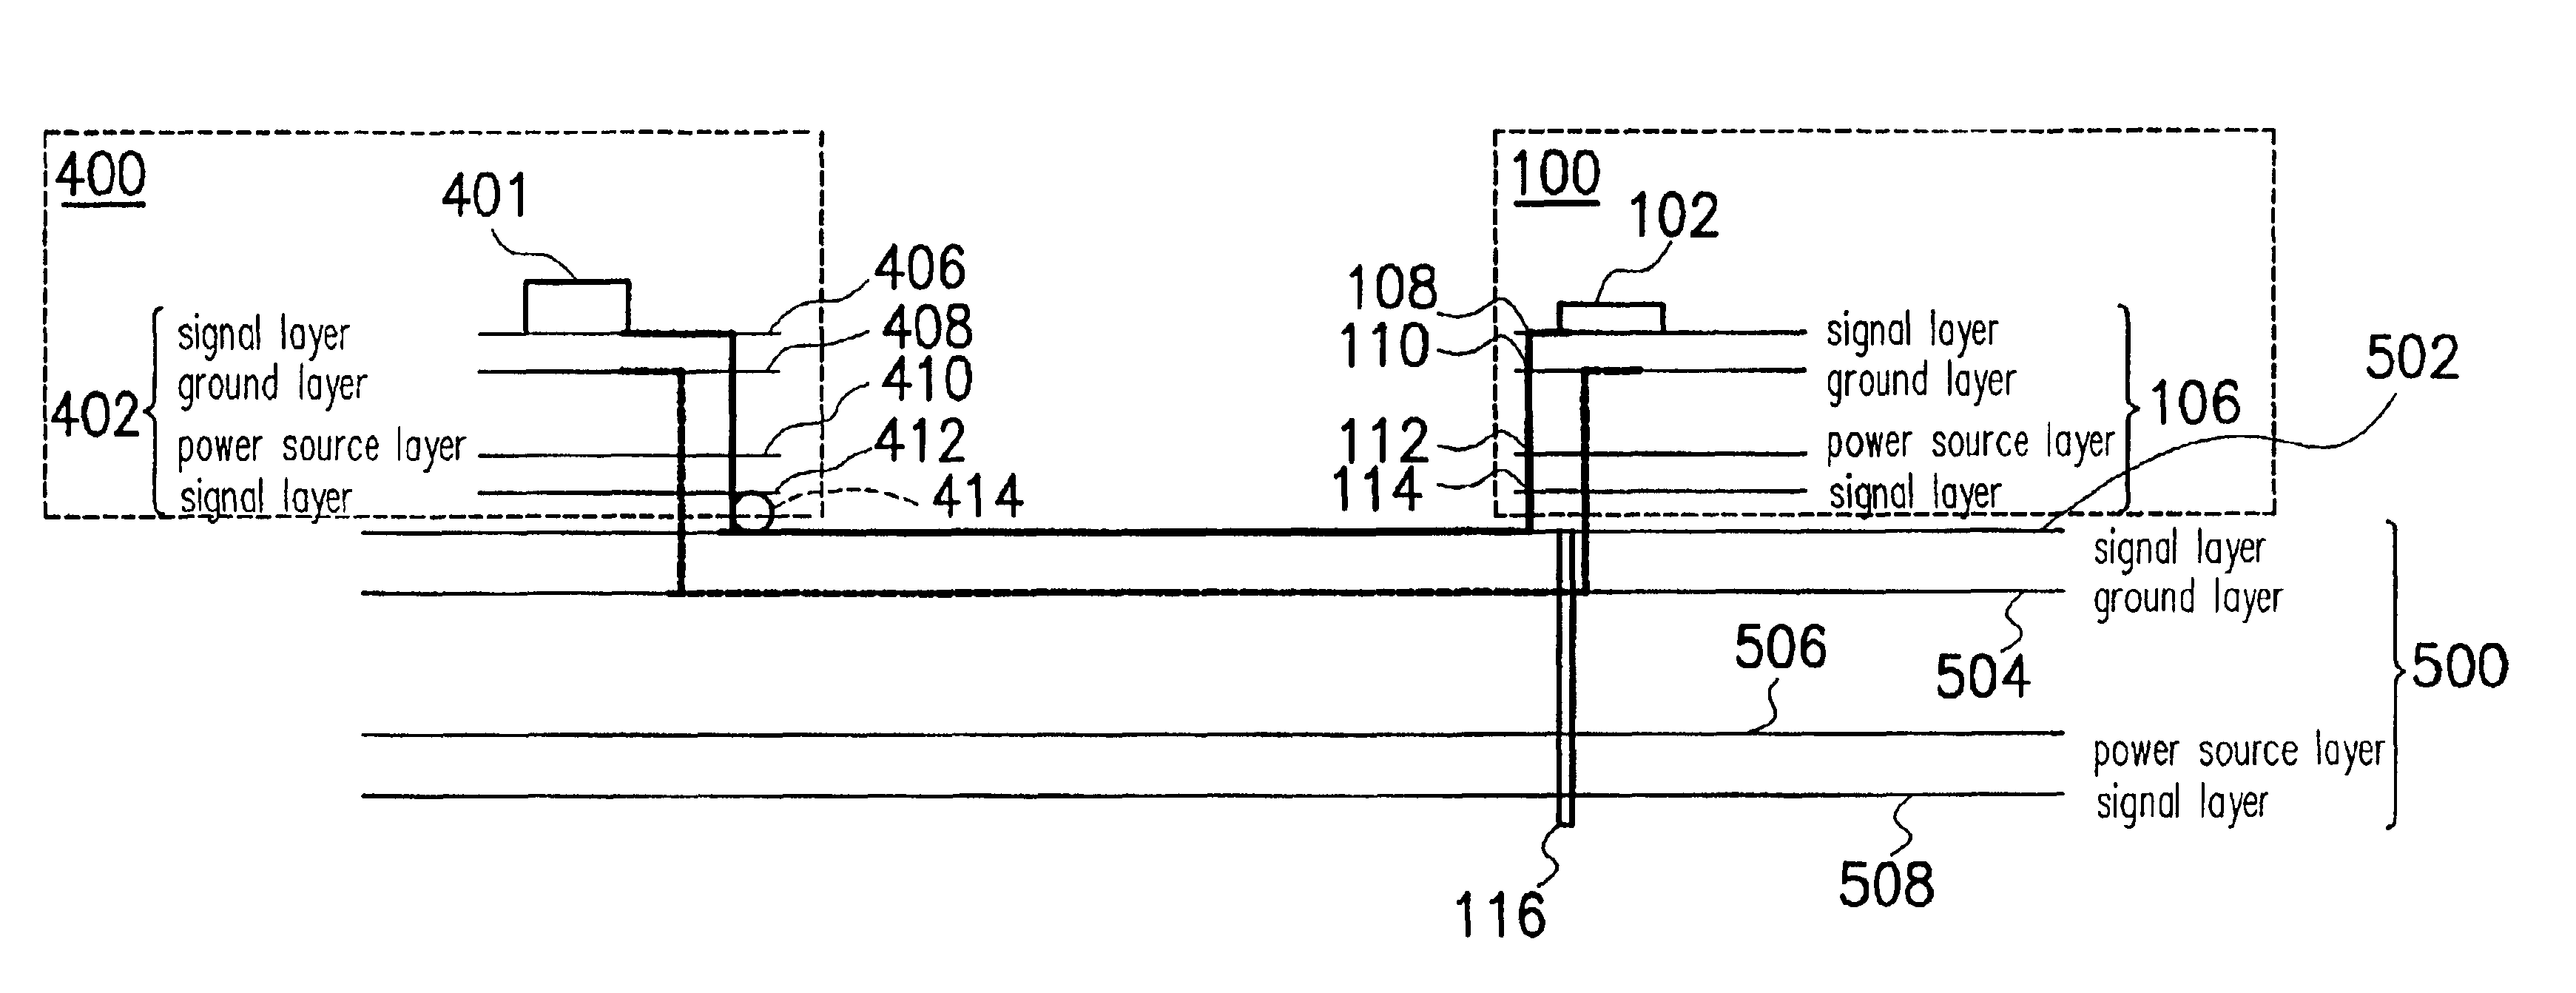 Data processing system and associated control chip and printed circuit board